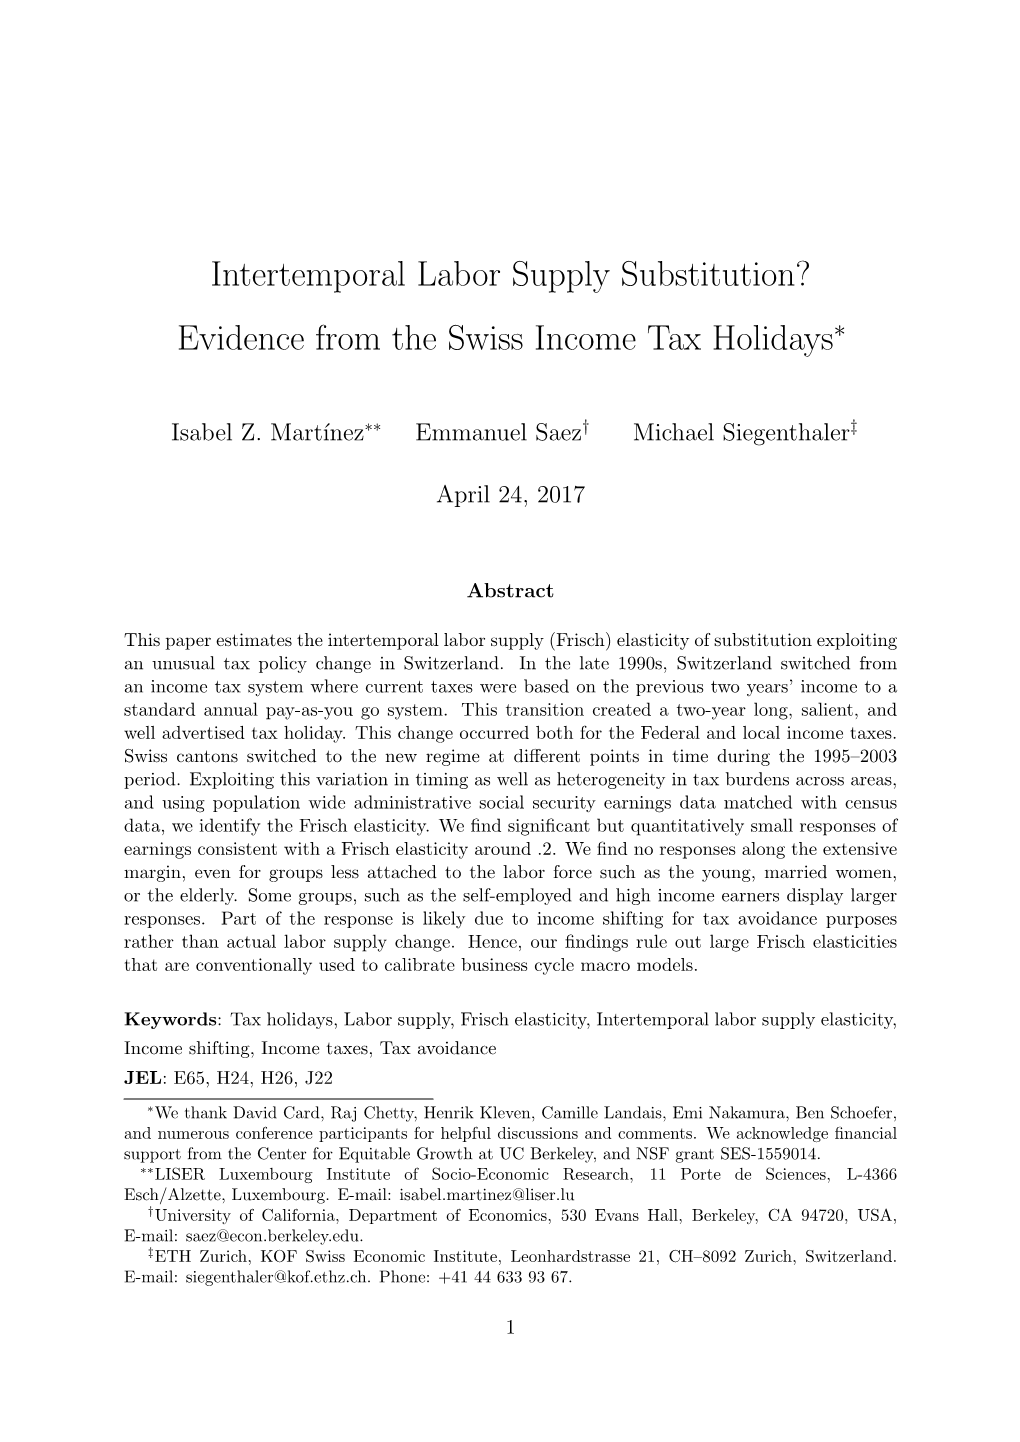 Intertemporal Labor Supply Substitution? Evidence from the Swiss Income Tax Holidays∗